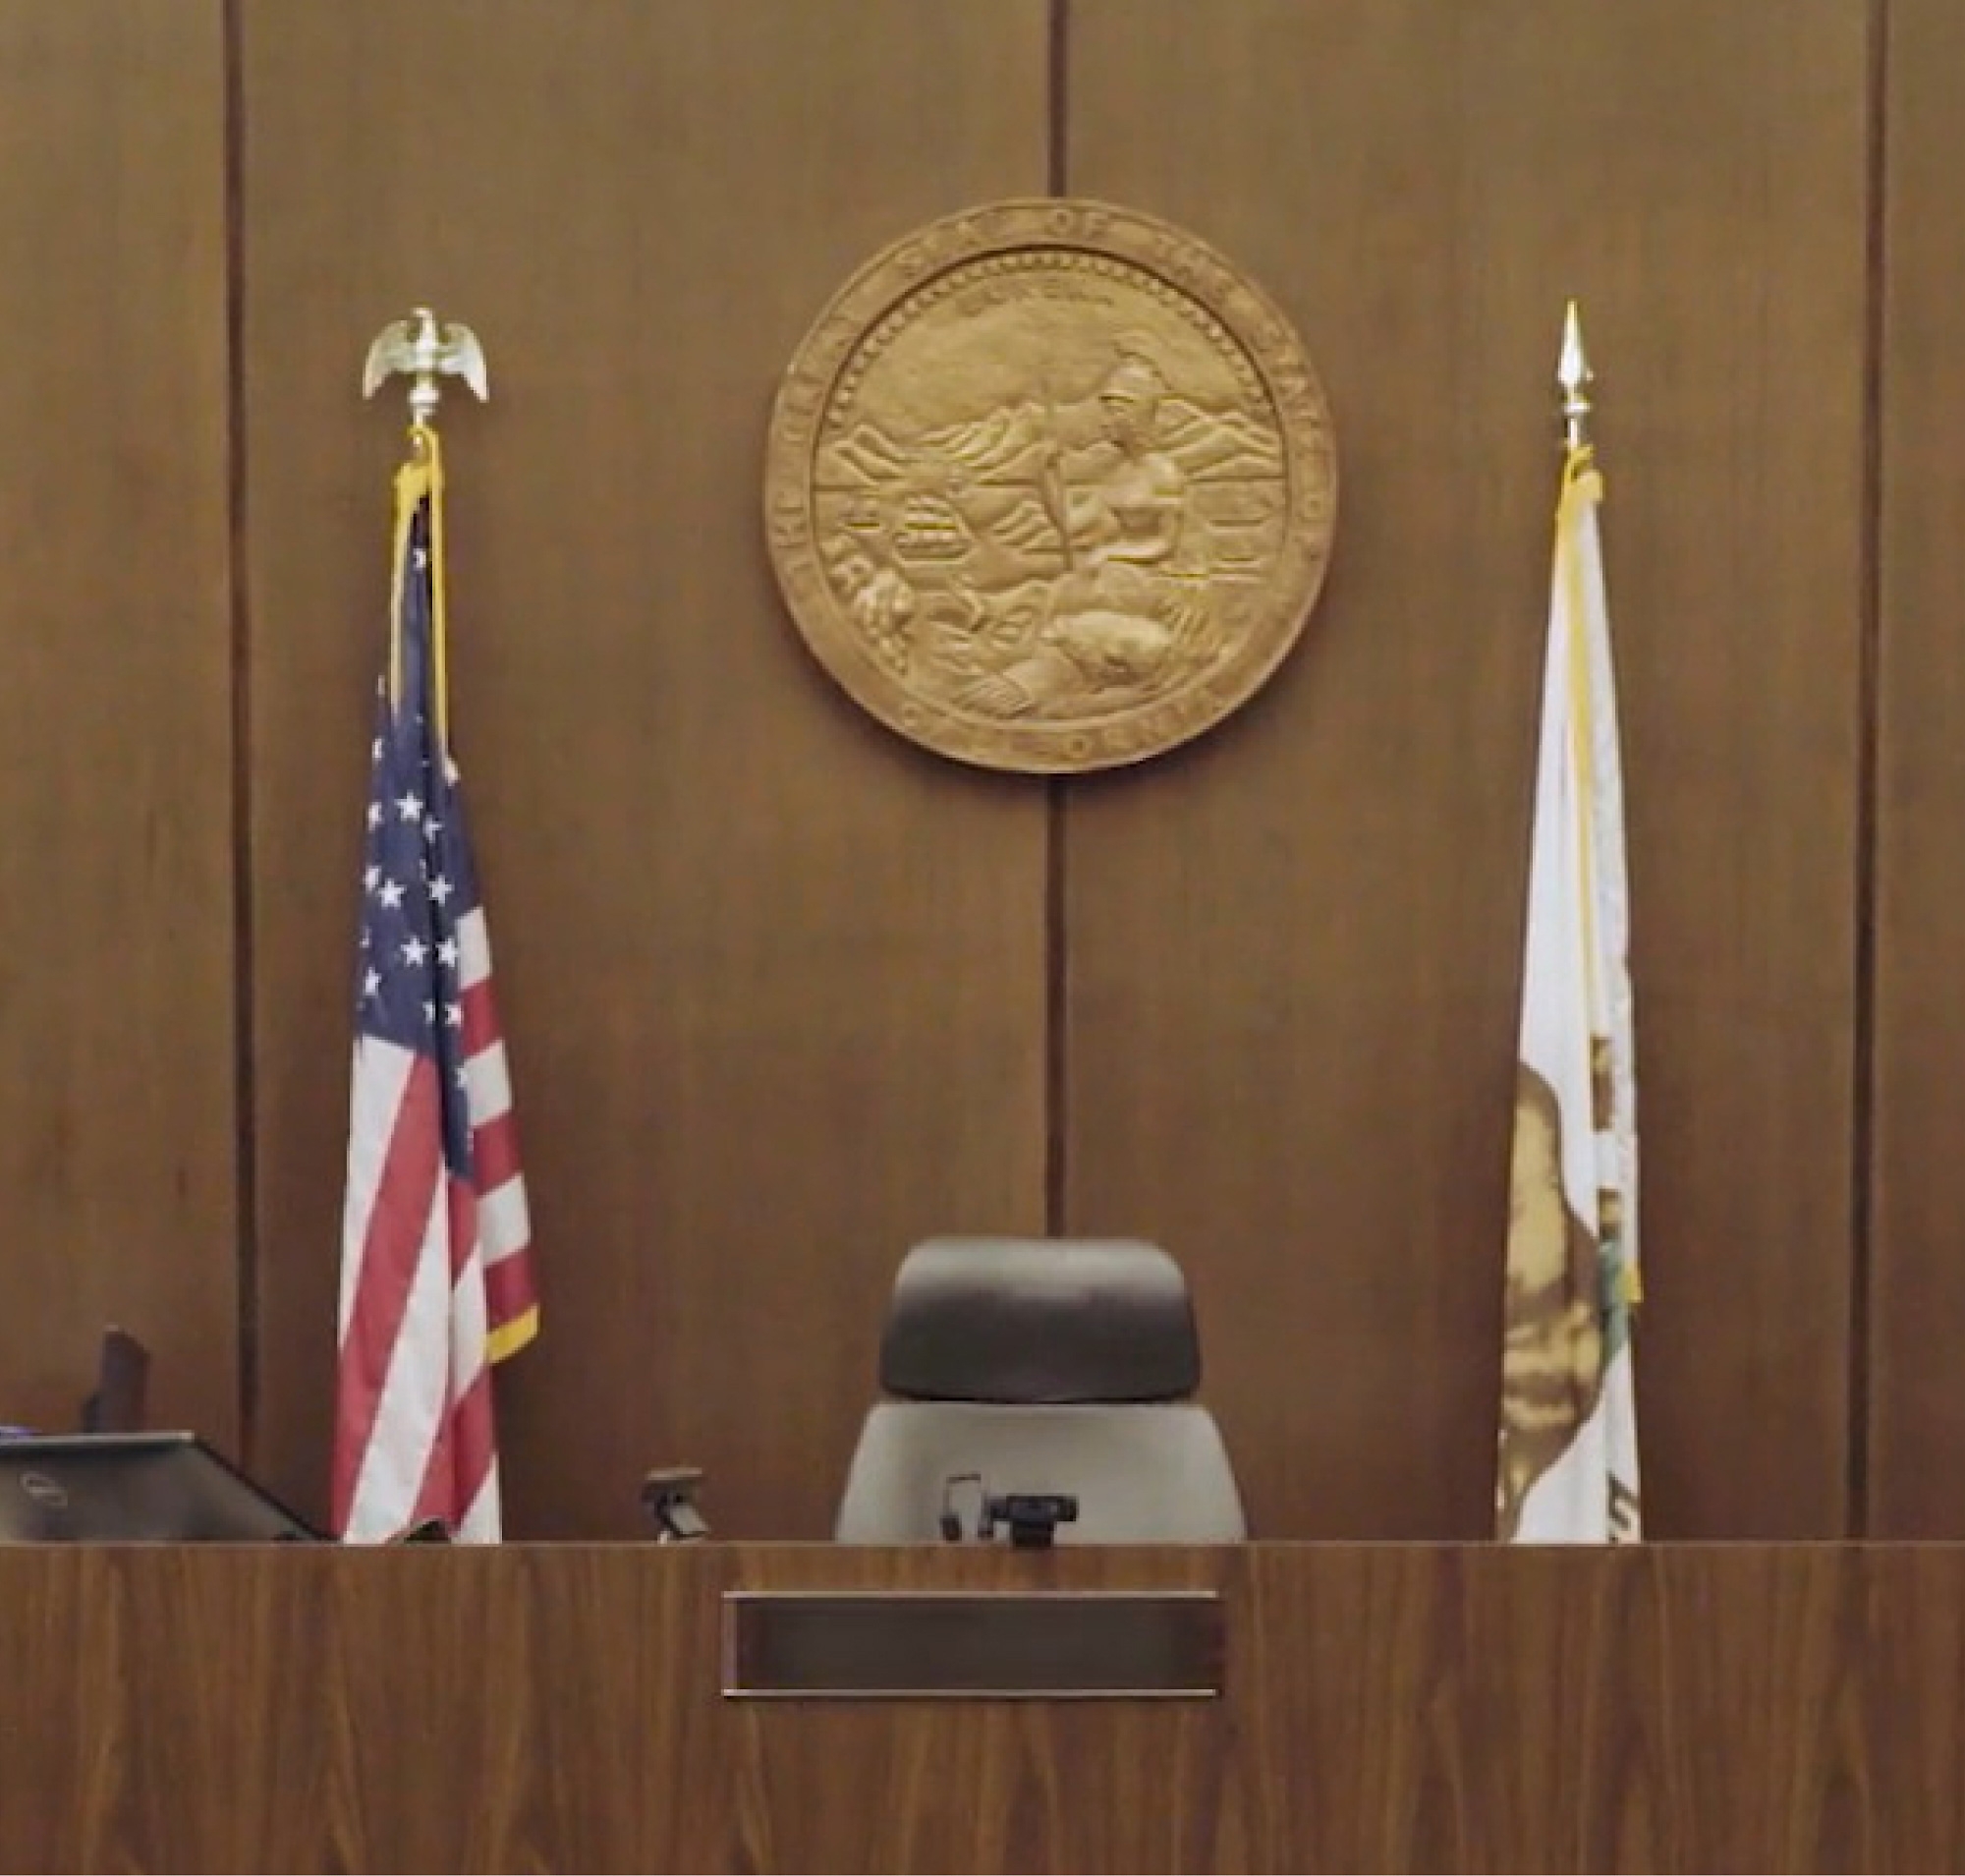 Empty judge's chair in a courtroom with a state seal on the wall, flanked by the u.s. and state flags.